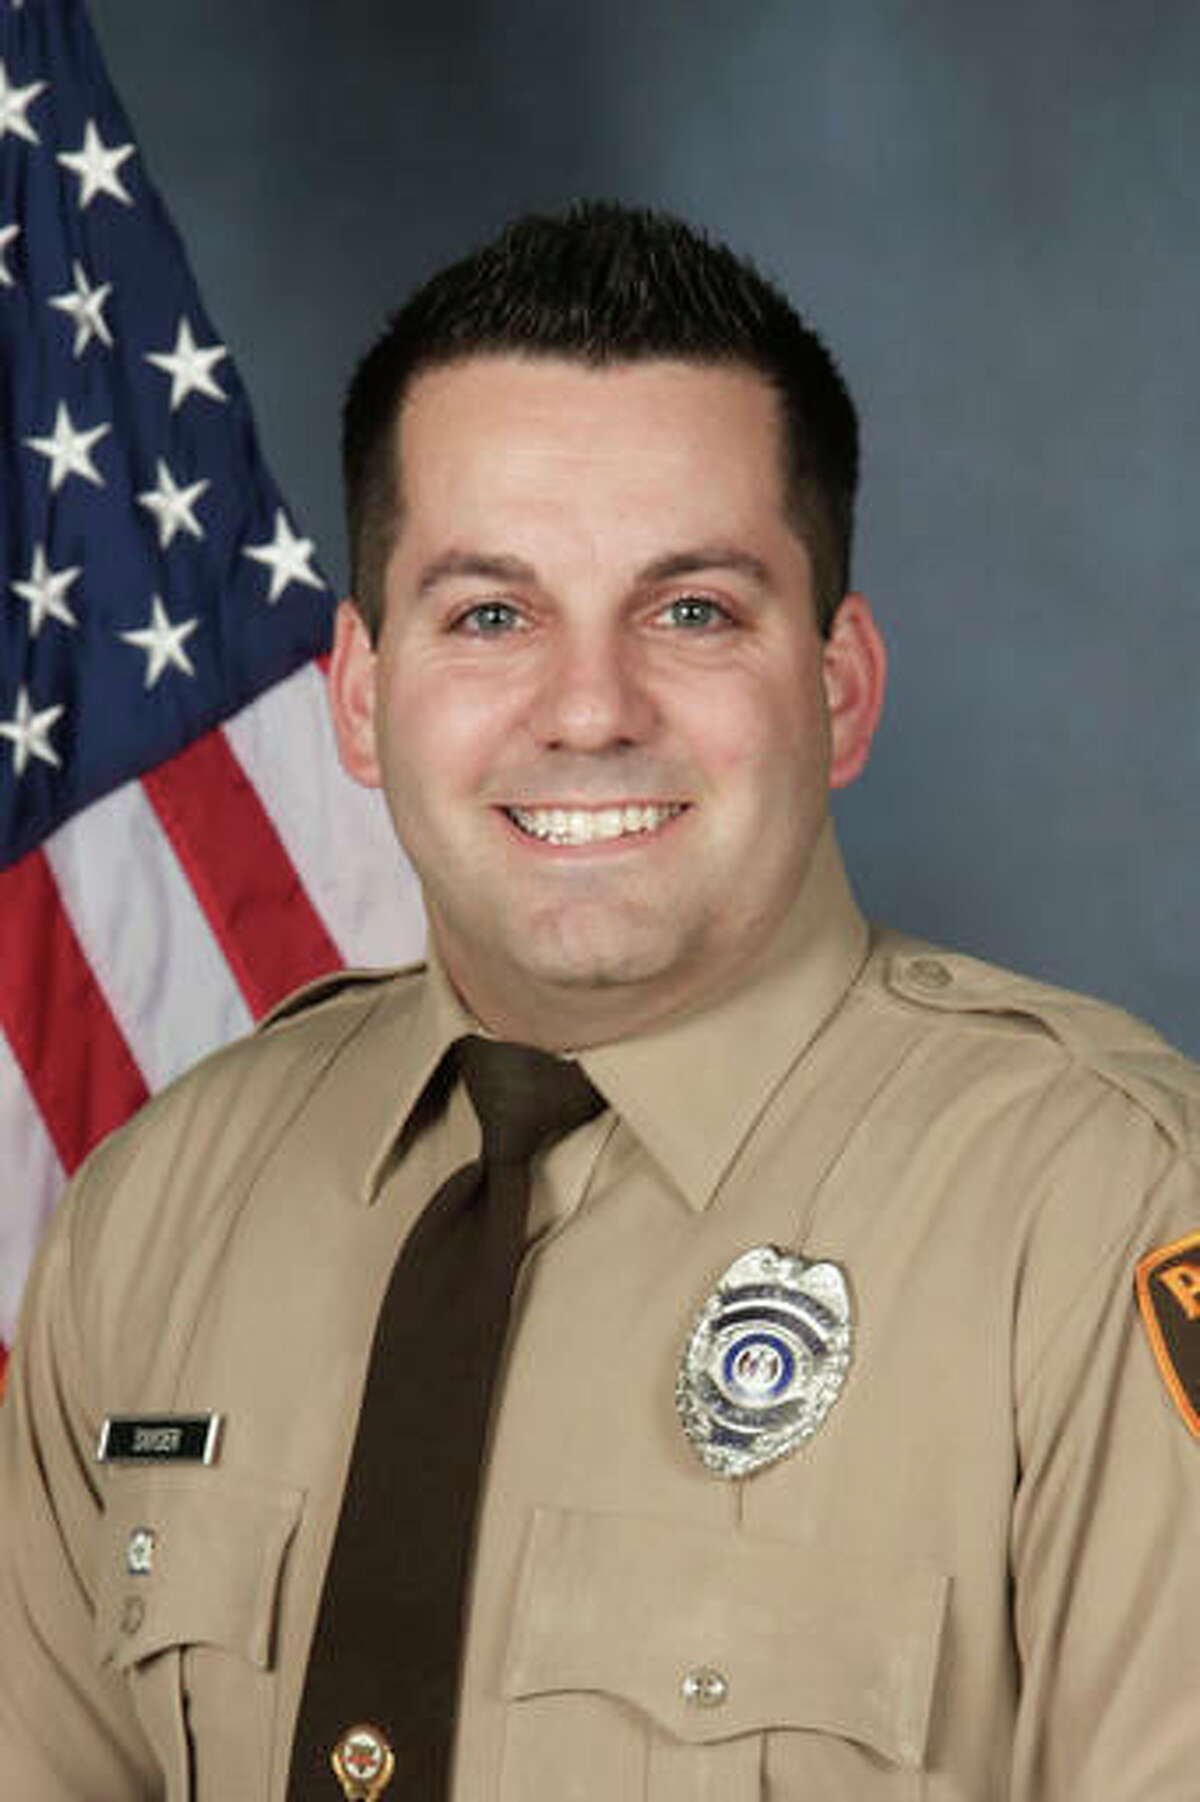 An undated photo provided by the St. Louis County Police Department shows St. Louis County Police officer Blake Snyder. Police say 33-year-old white officer Blake Snyder was fatally wounded during a pre-dawn shooting Thursday, Oct. 6, 2016, in Green Park, Mo., a small middle-class community. Police say the suspect, an 18-year-old white male, is in critical but stable condition after being shot by another officer. (St. Louis County Police Department via AP)